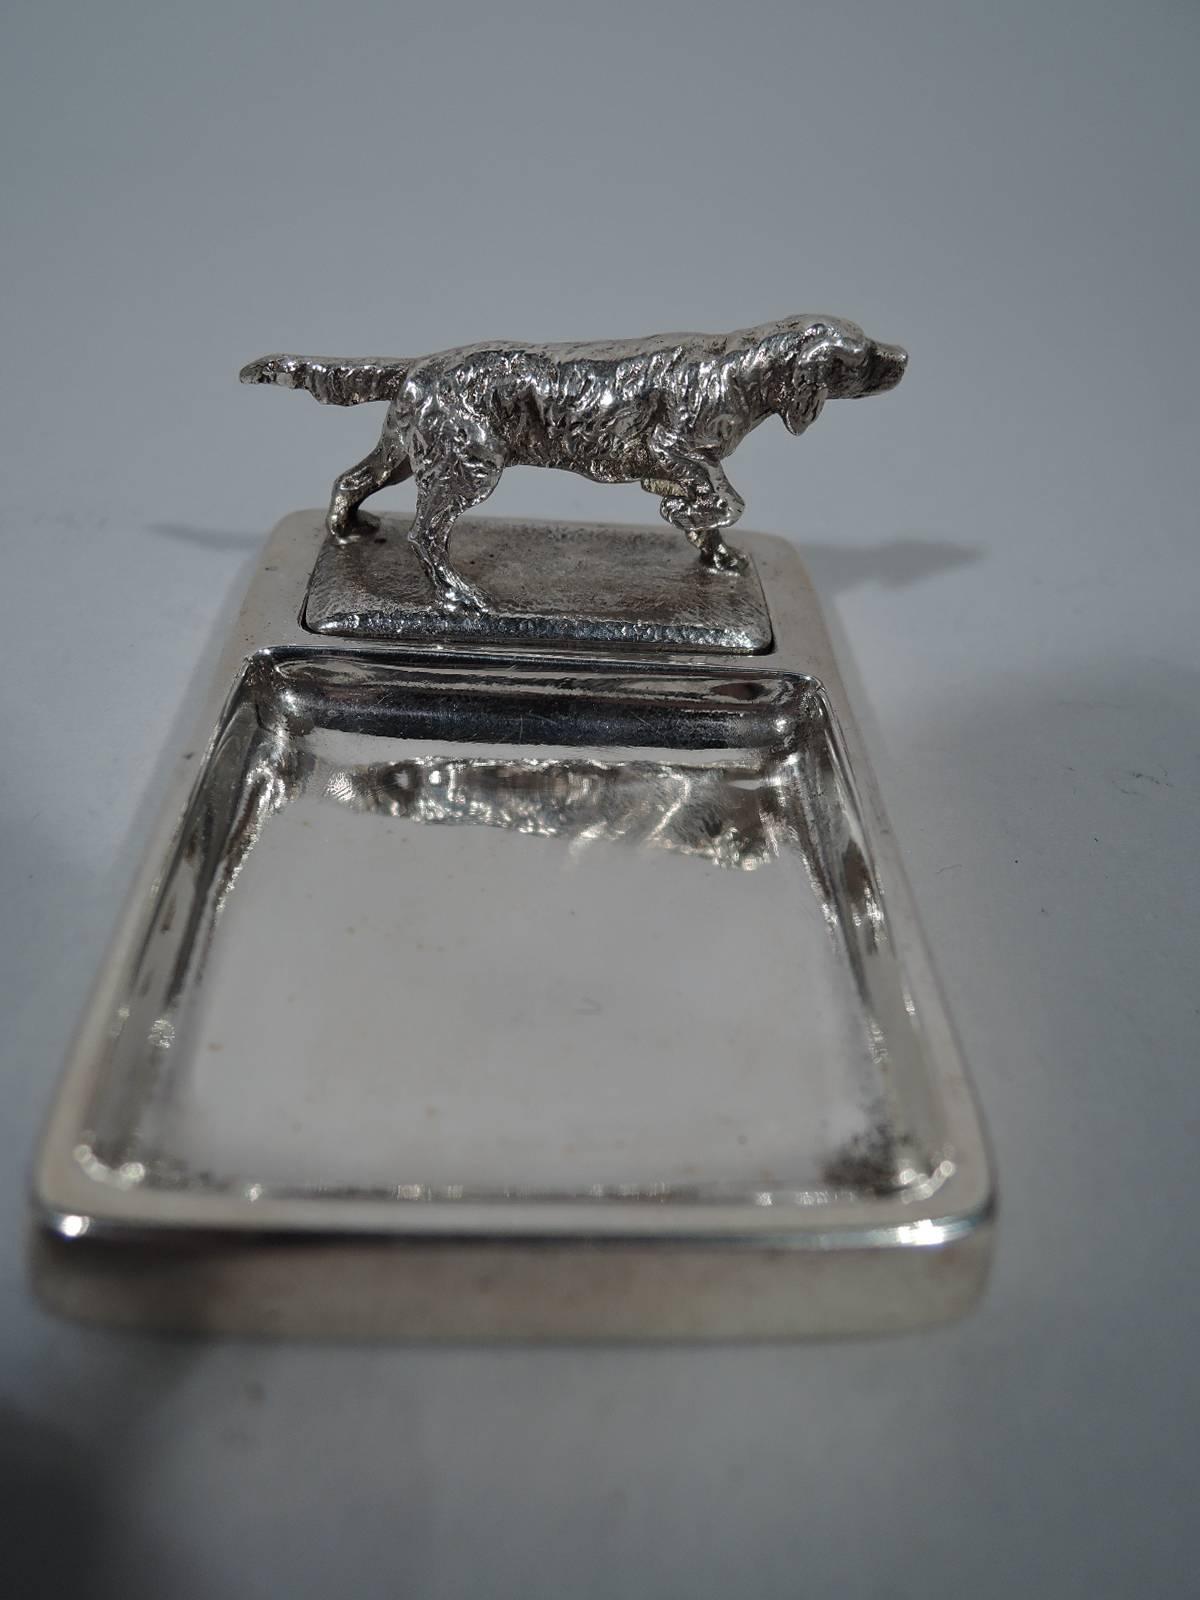 Sterling silver vide-poche. Made by Tiffany & Co. in New York, ca 1931. Rectangular base with square well. Cast retriever with raised paw and erect tail. Figure mounted to grassy ground set in rectangular well. A fine breed specific piece. Hallmark